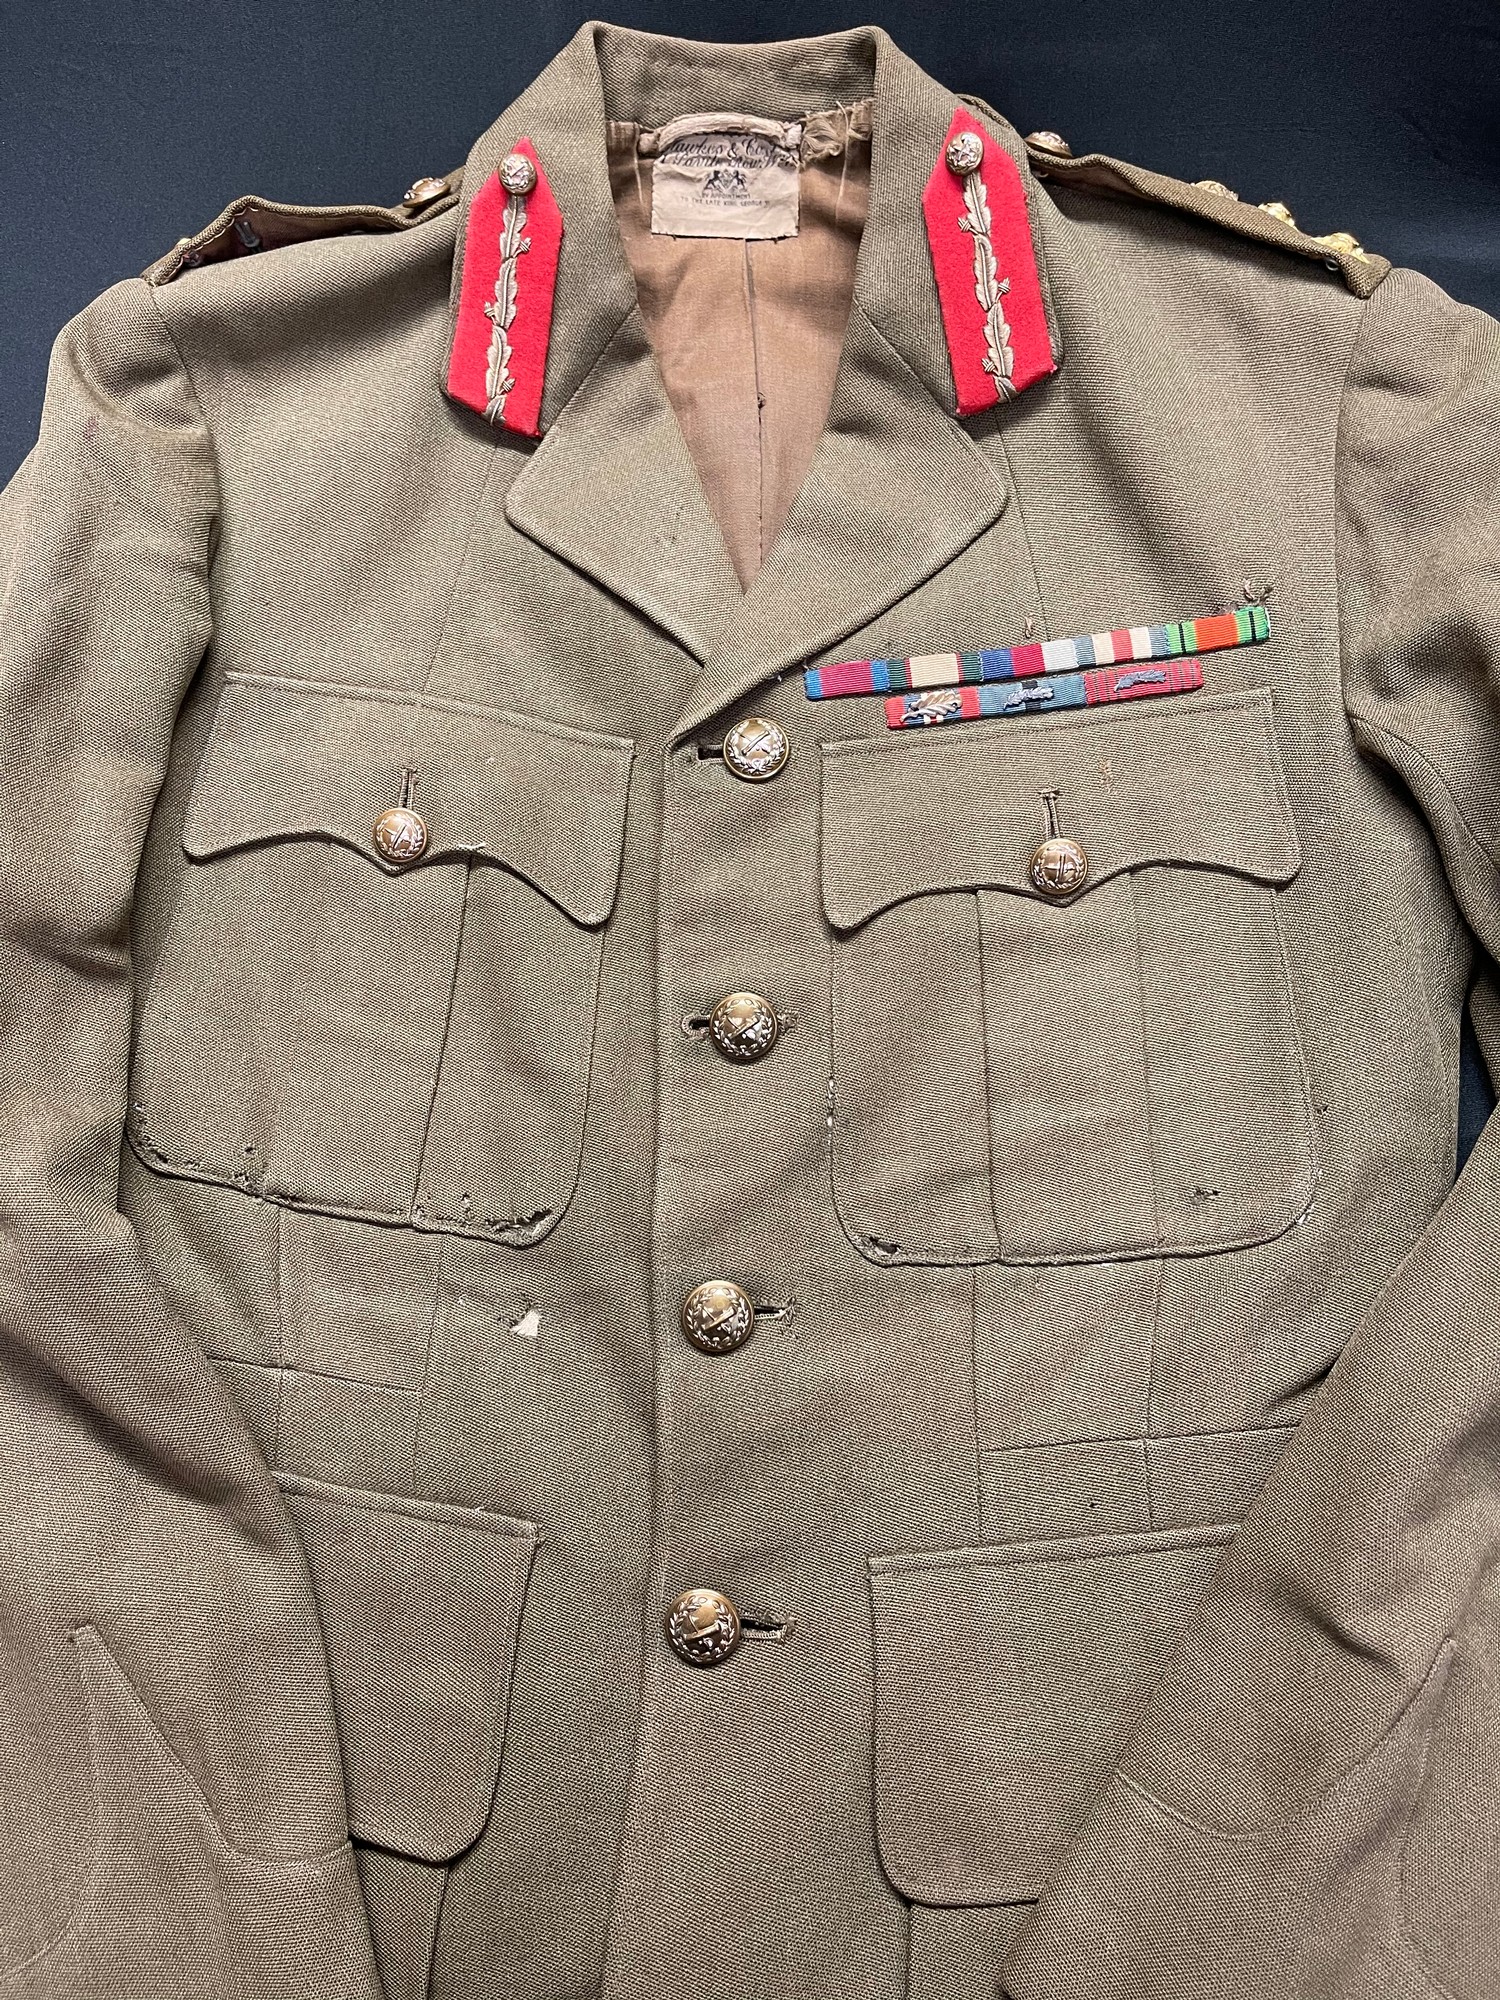 WW2 British Brigadiers Service Dress Tunic. Complete with original buttons, medals ribbons, gorget